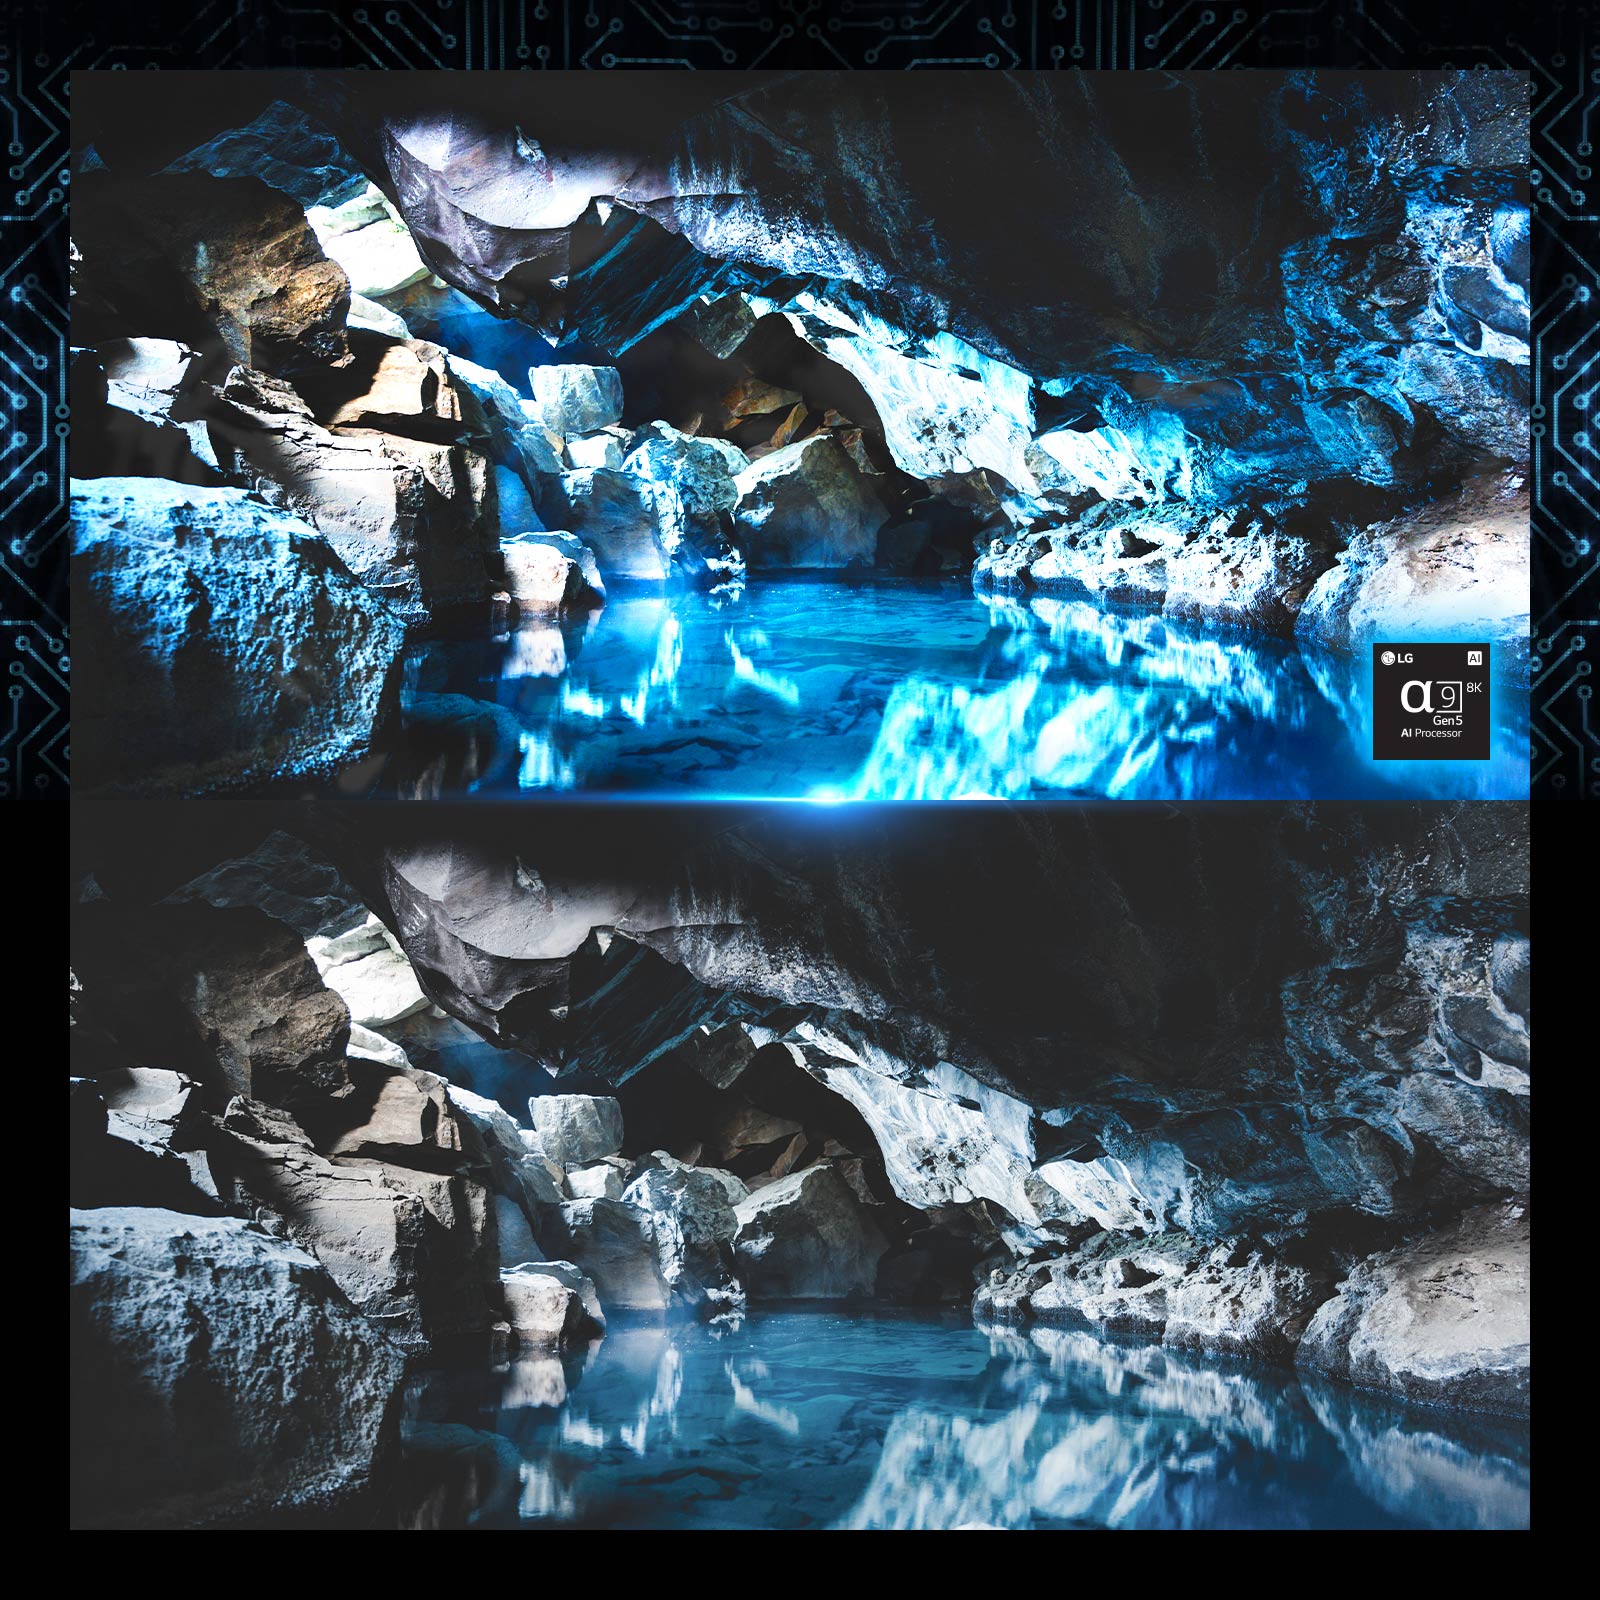 There is a image of inside of blue dark cave and there is a processor chip image on right bottom corner. There is a same visual of blue dark cave right below but a more pale version. 